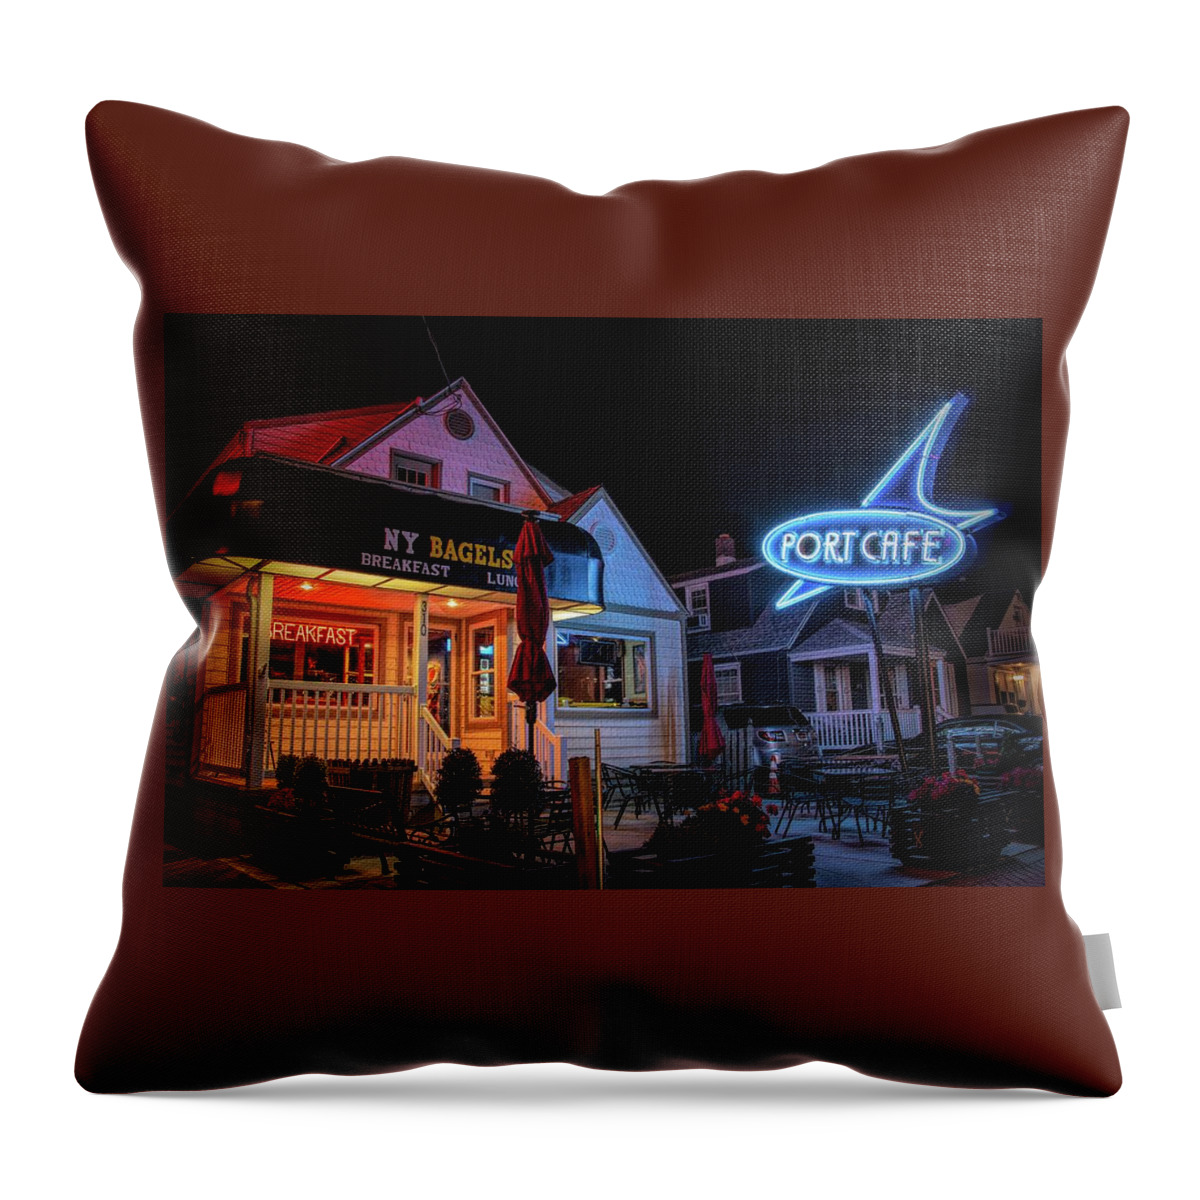 Port Cafe Throw Pillow featuring the photograph Port Cafe Wildwood by Kristia Adams